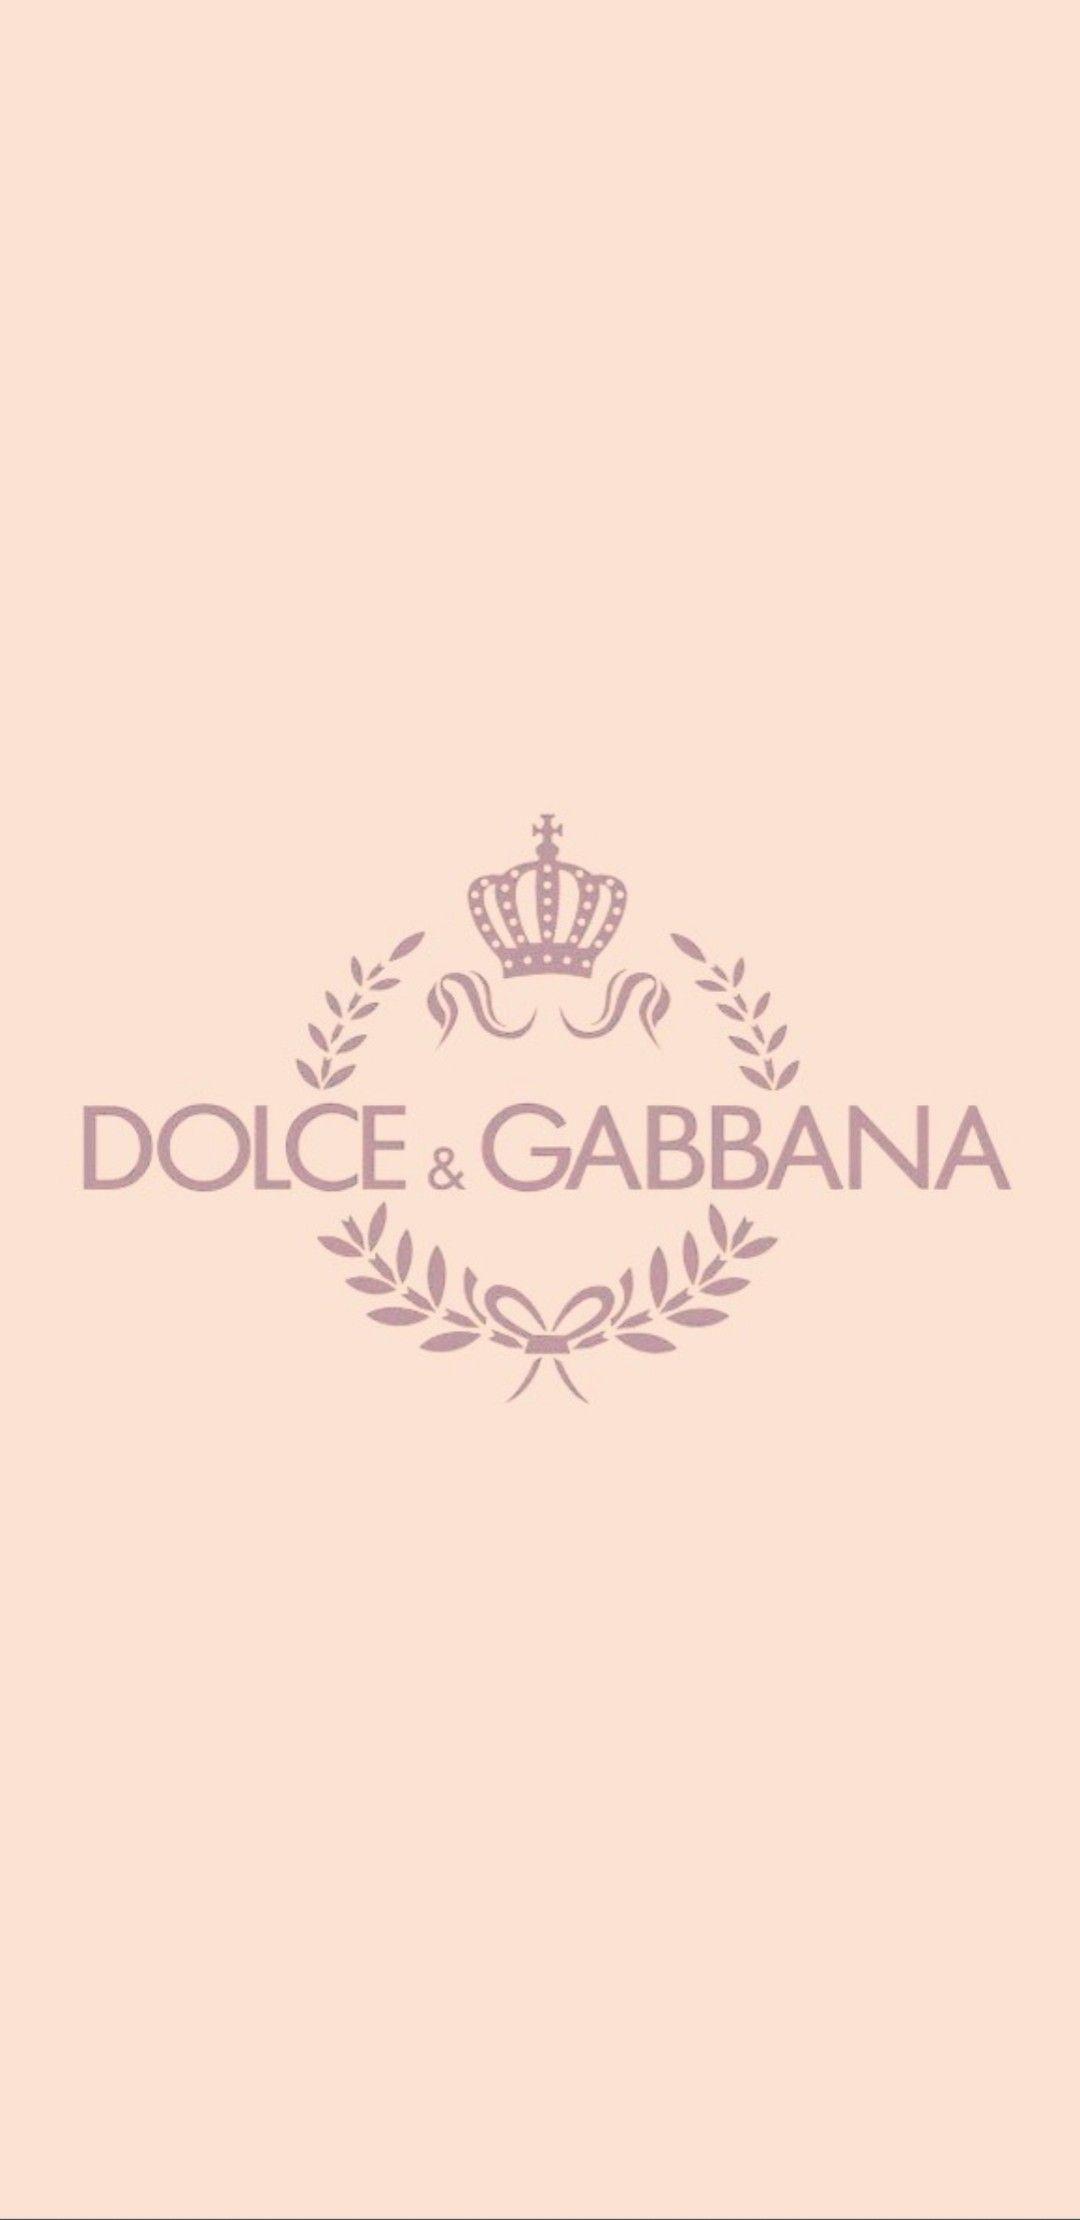 Dolce and Gabbana Wallpaper iPhone 1080x2220